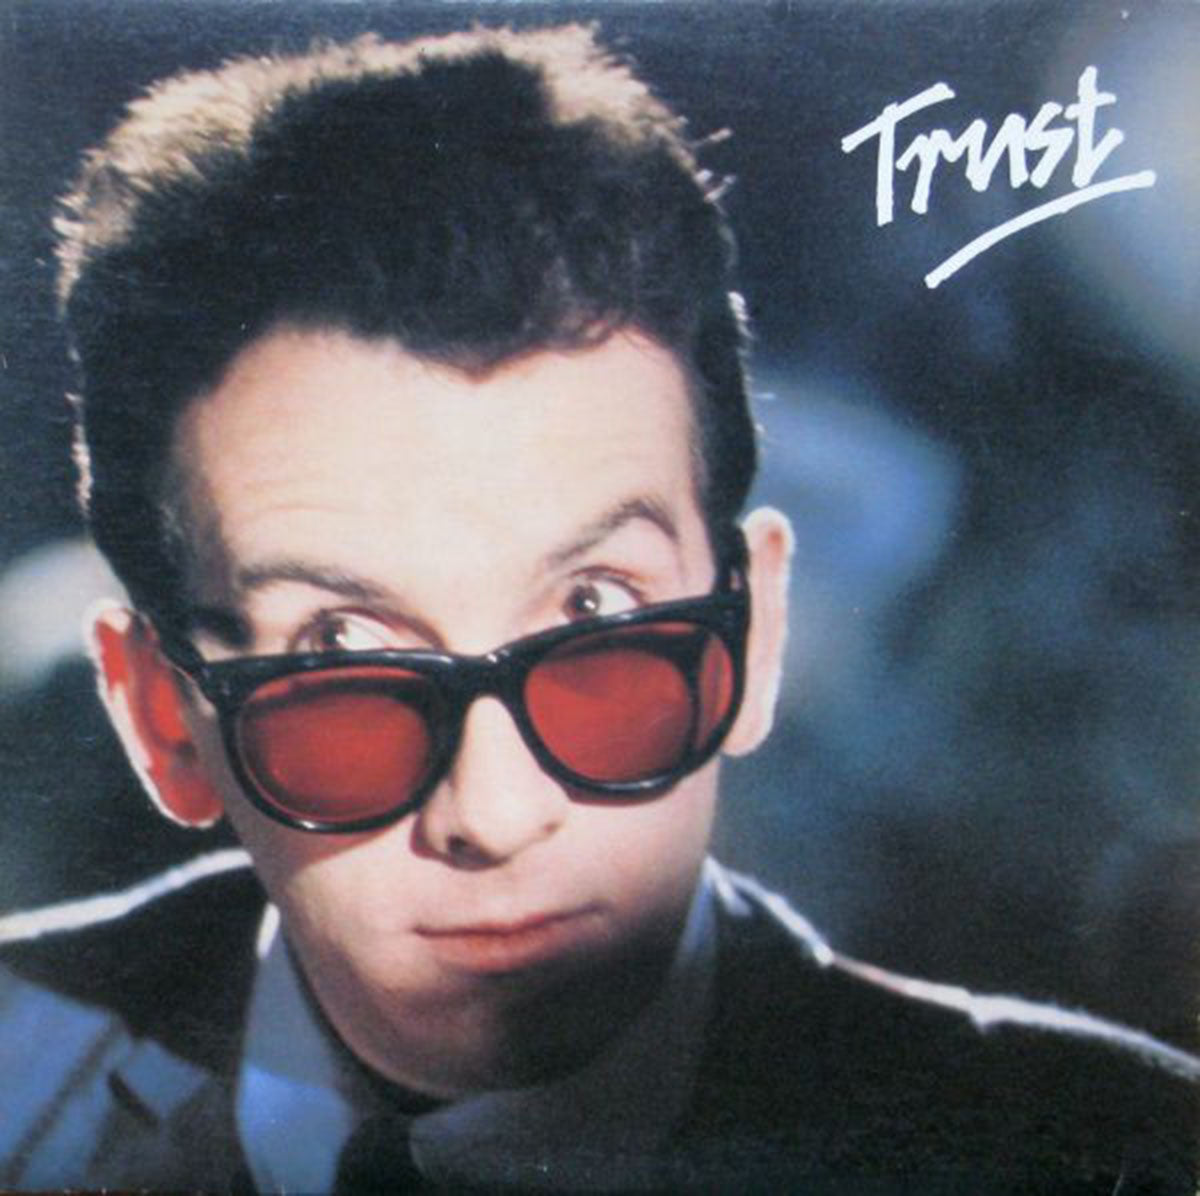 Elvis Costello and The Attractions – Trust